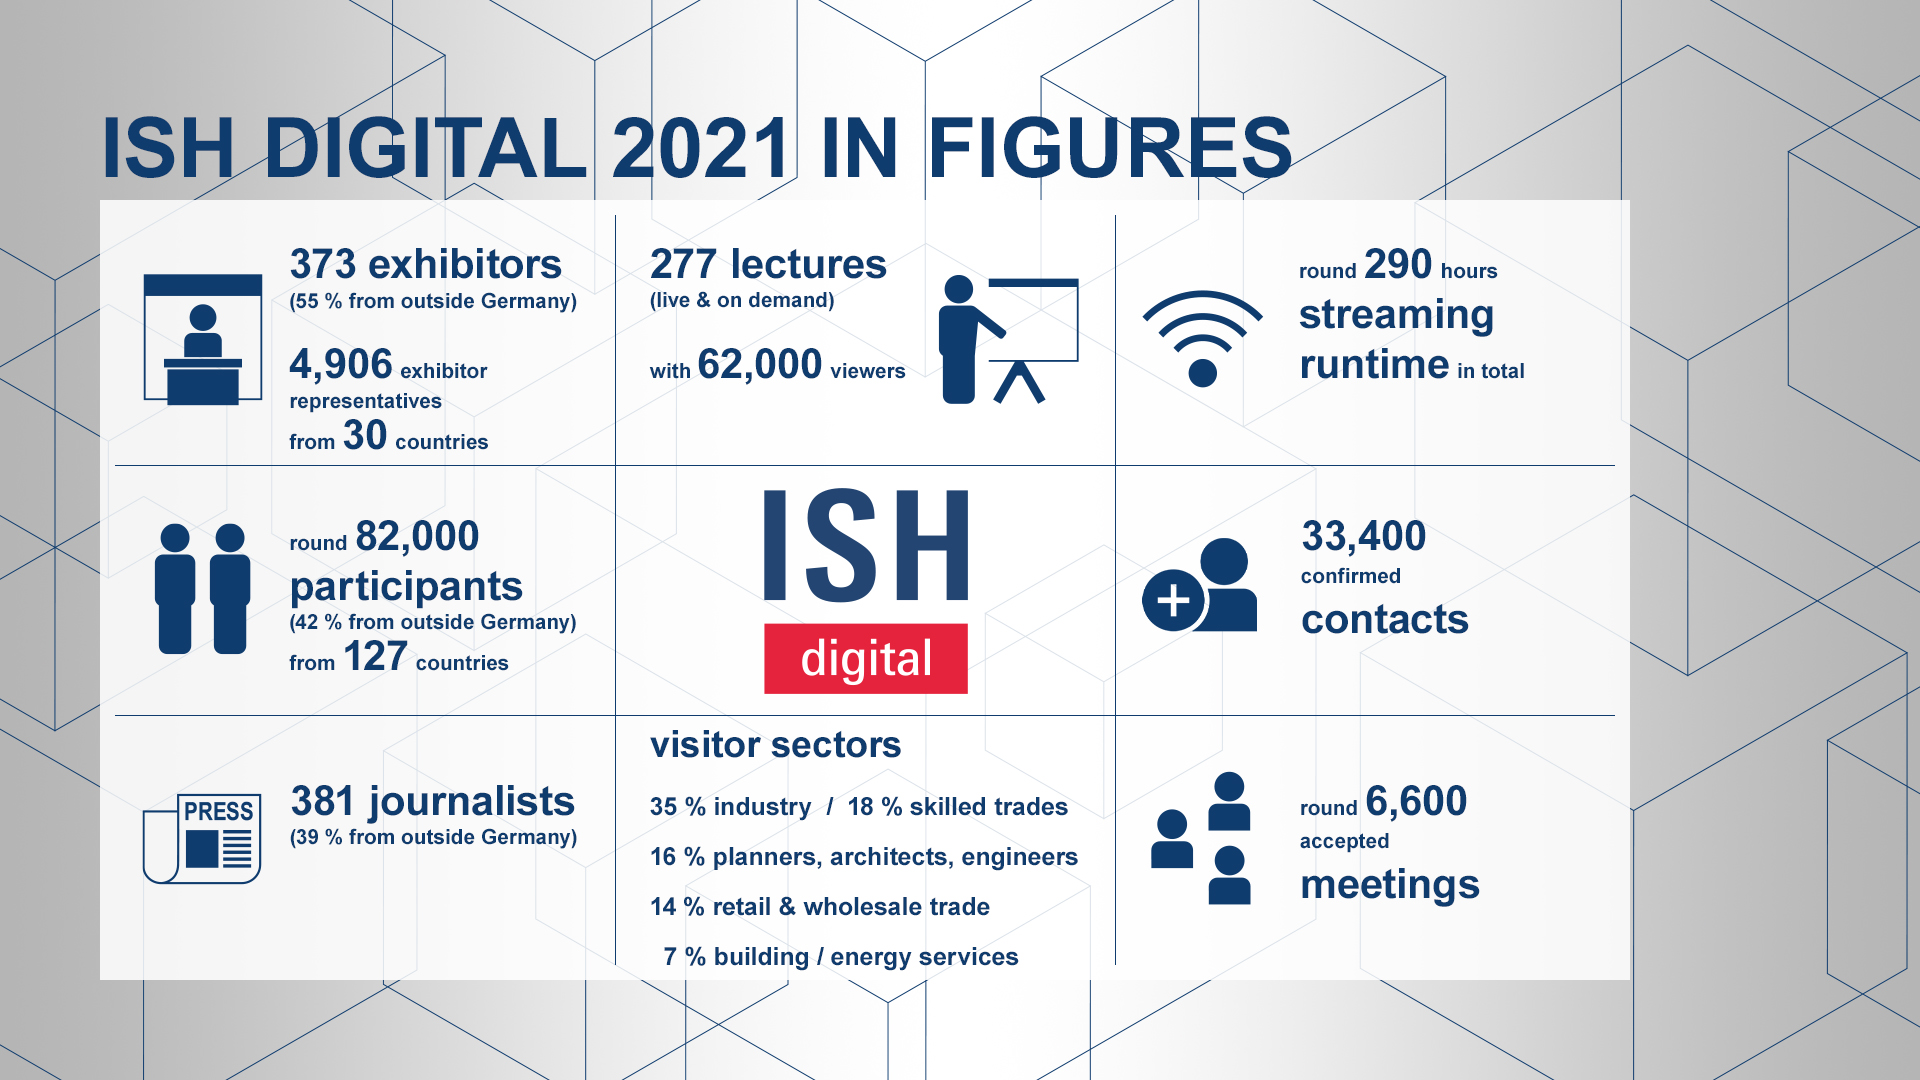 Facts and figures about ISH digital 2021 (Source: Messe Frankfurt Exhibition GmbH)